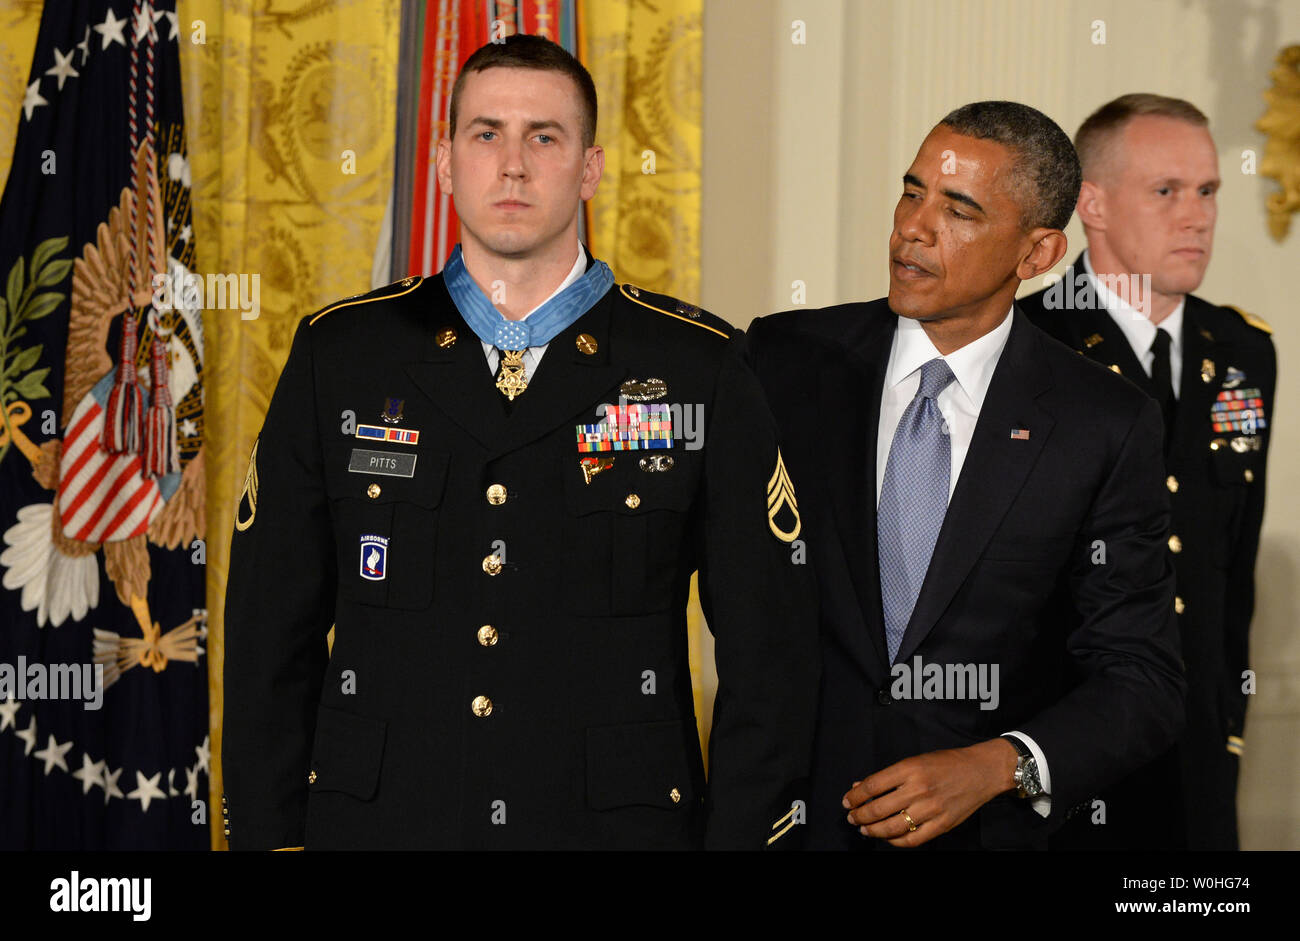 U.S. President Barack Obama presents the Medal of Honor to former Army Staff Sergeant Ryan Pitts during a ceremony in the East Room of the White House on July 21, 2014.  Pitts, from the 2nd Platoon, Chosen Company, 2nd Battalion (Airborne), 503rd Infantry Regiment, 173rd Airborne Brigade, was awarded the Nation's highest military honor for his courageous actions during combat operations at Vehicle Patrol Base Kahler in Kunar Province, Afghanistan on July 13, 2008.       UPI/Pat Benic Stock Photo